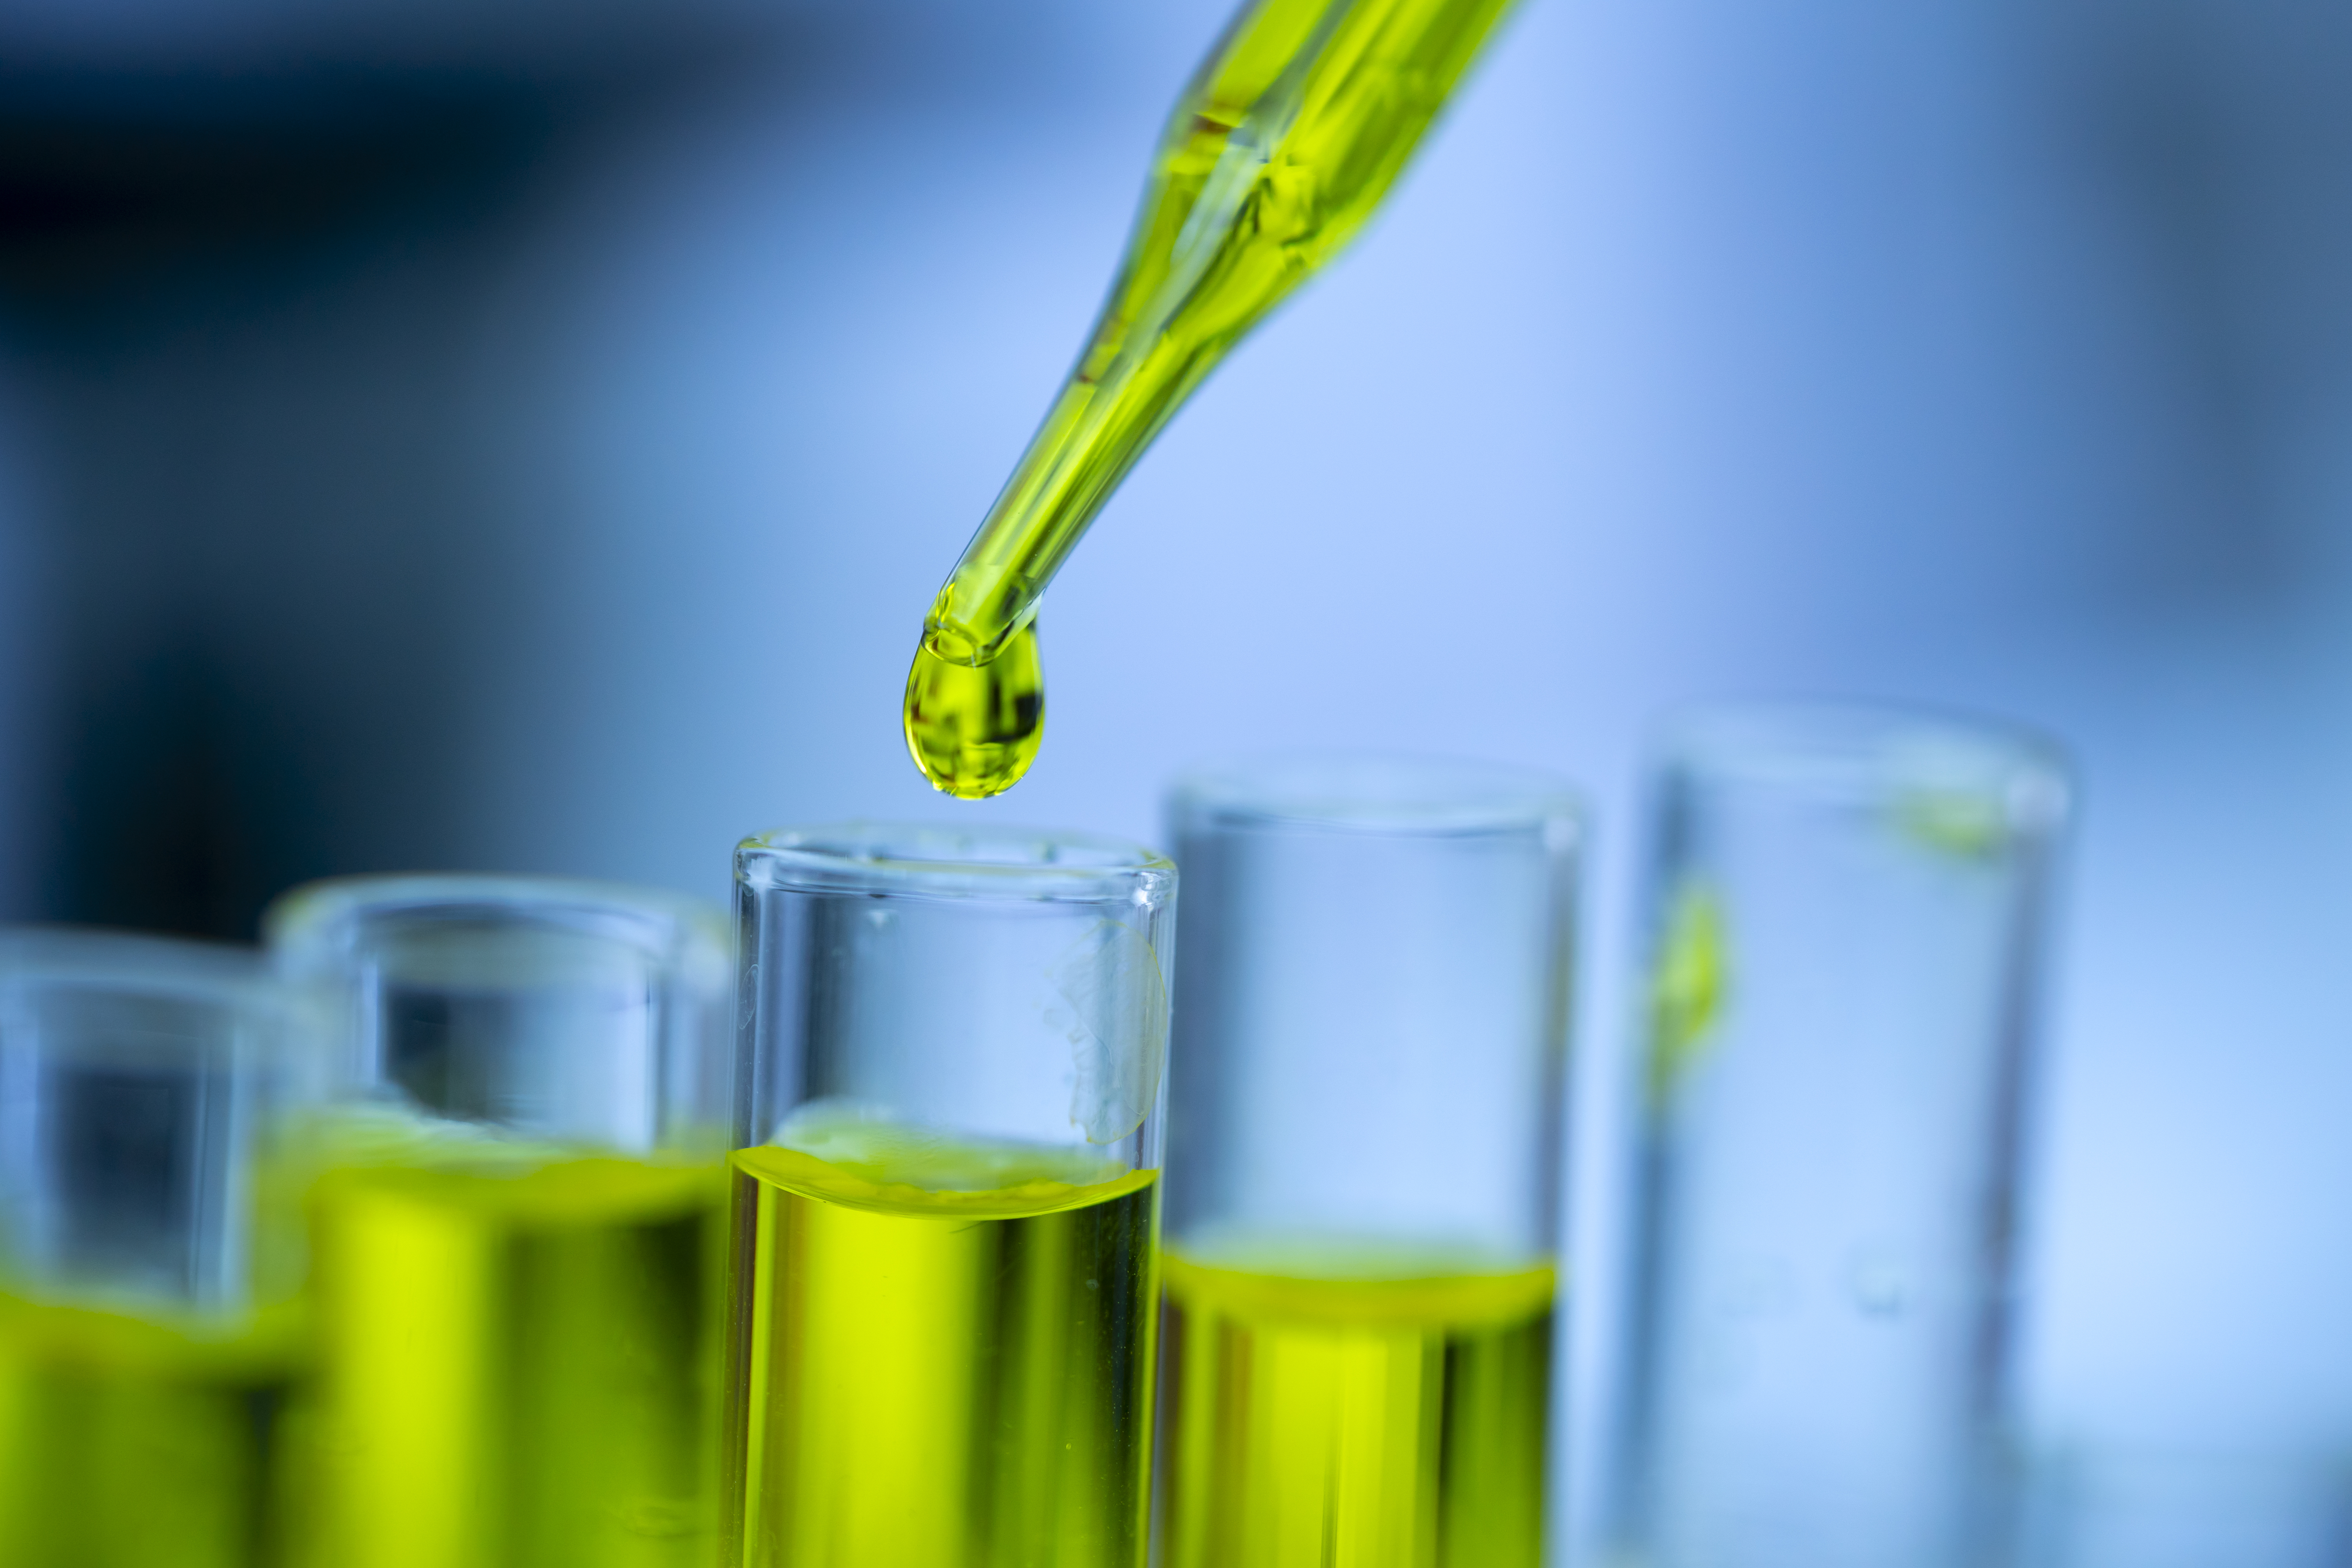 Closeup of a female scientist in a laboratory working with CBD oil extracted from a marijuana plant. She is tearing the CBD oil from one tube into another